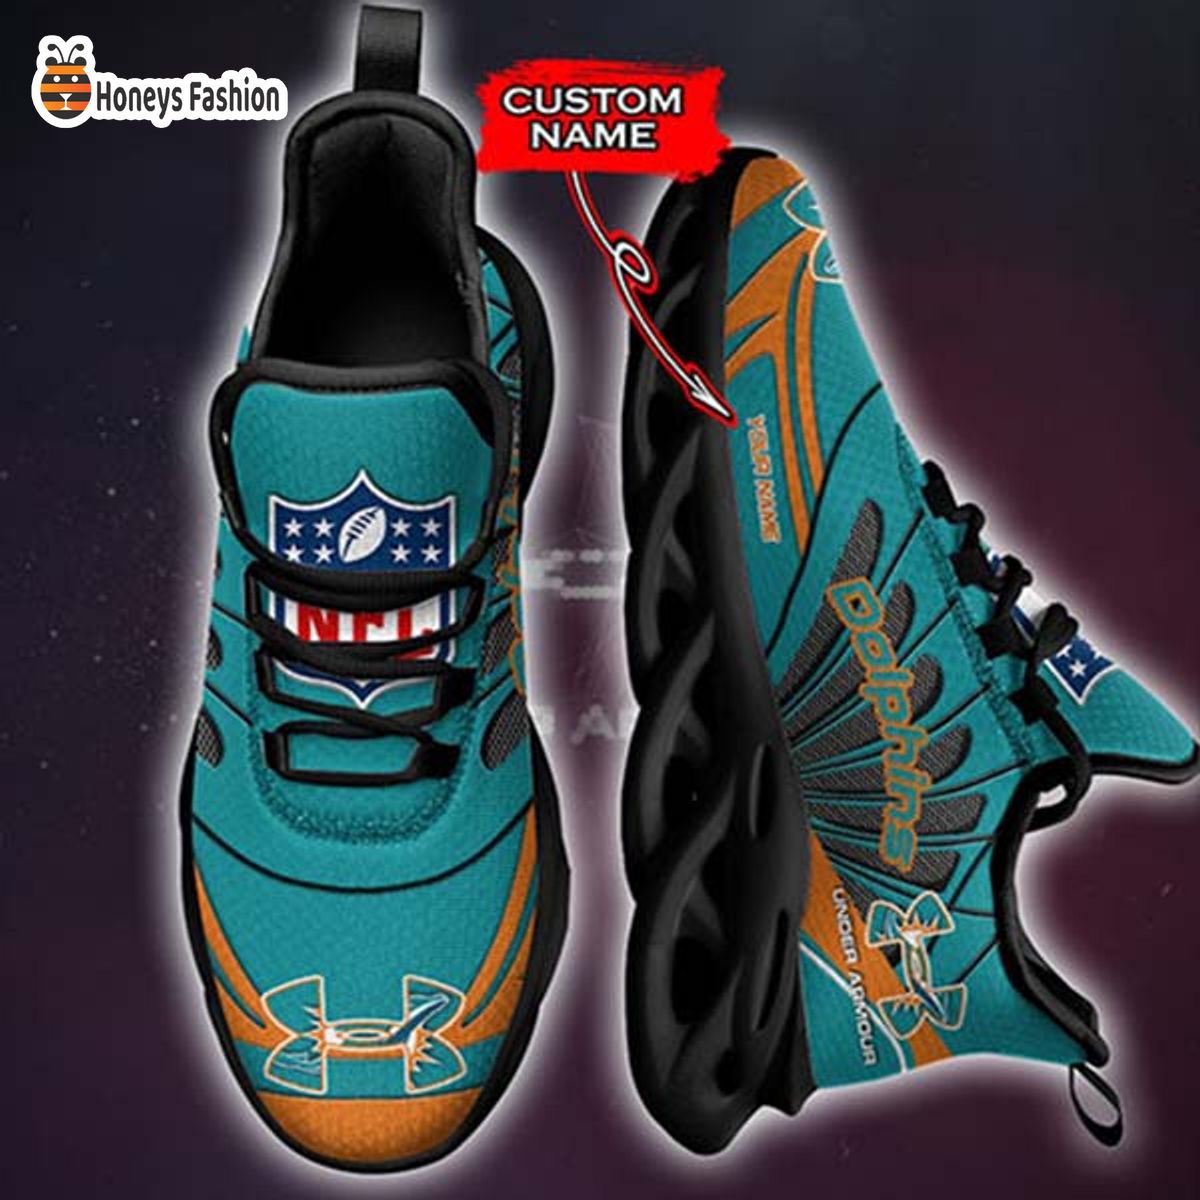 Miami Dolphins Under Armour Custom Name Max Soul Sneaker